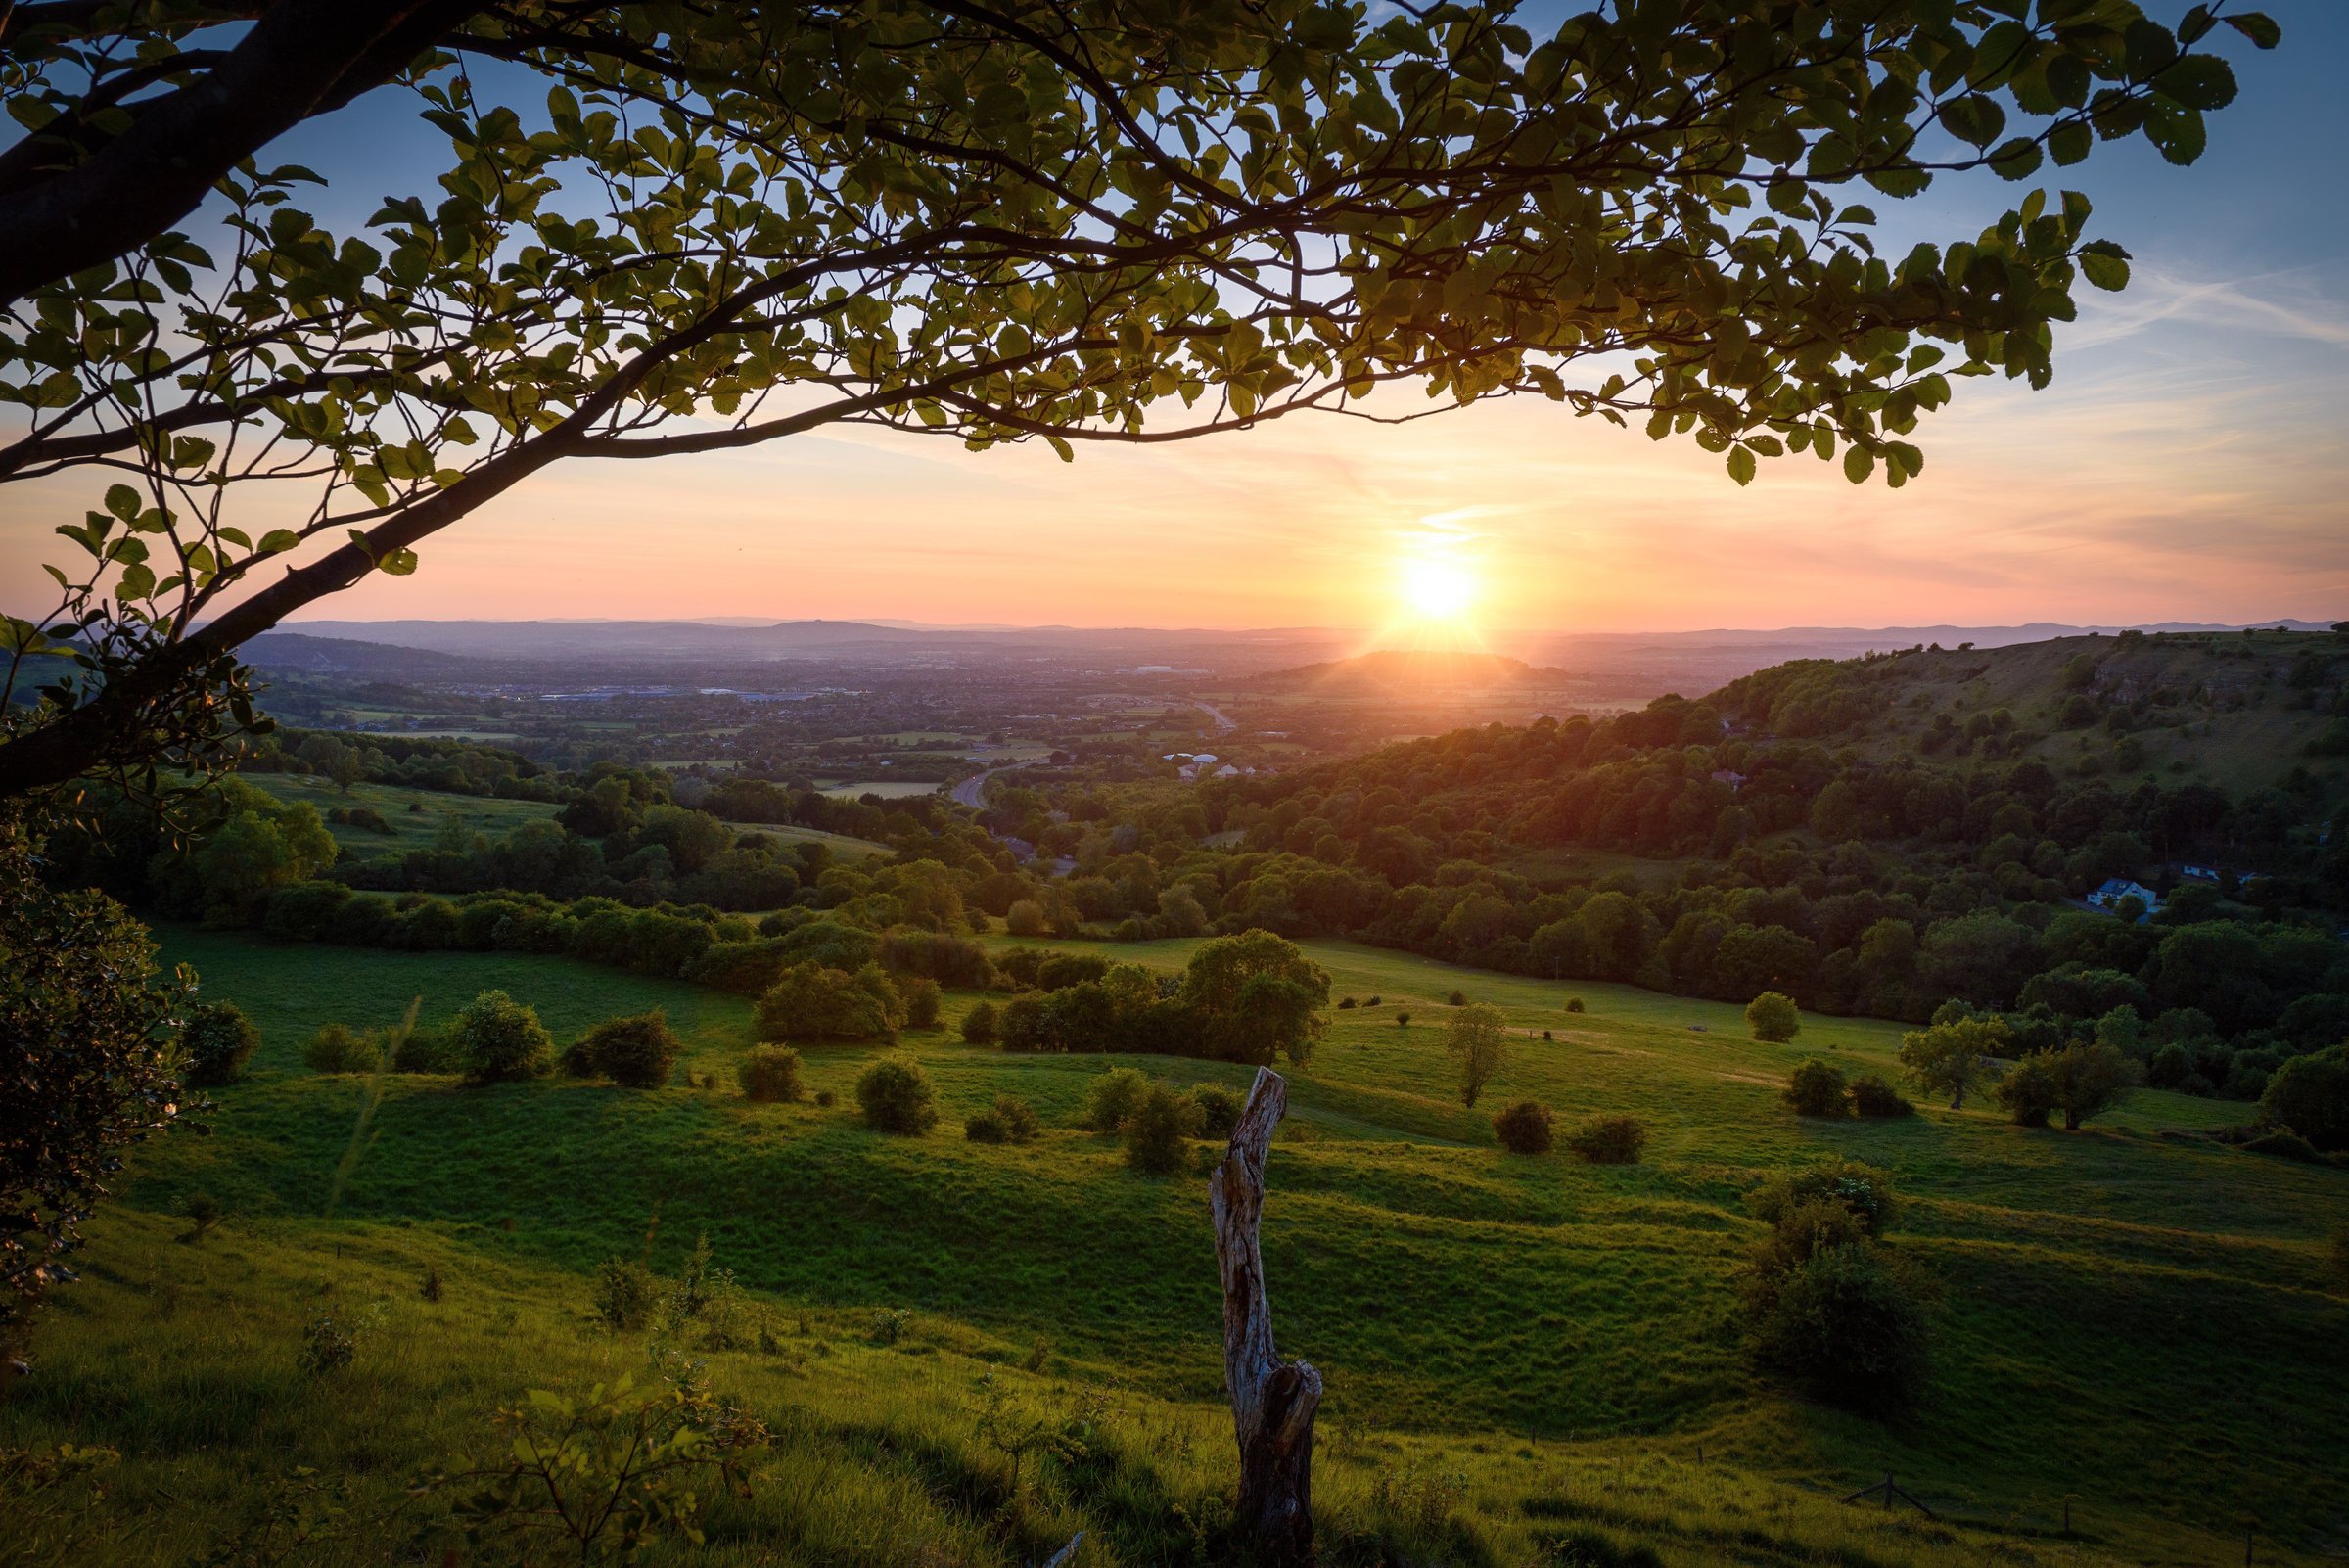 Walks & trails at Forest of Dean, Gloucestershire